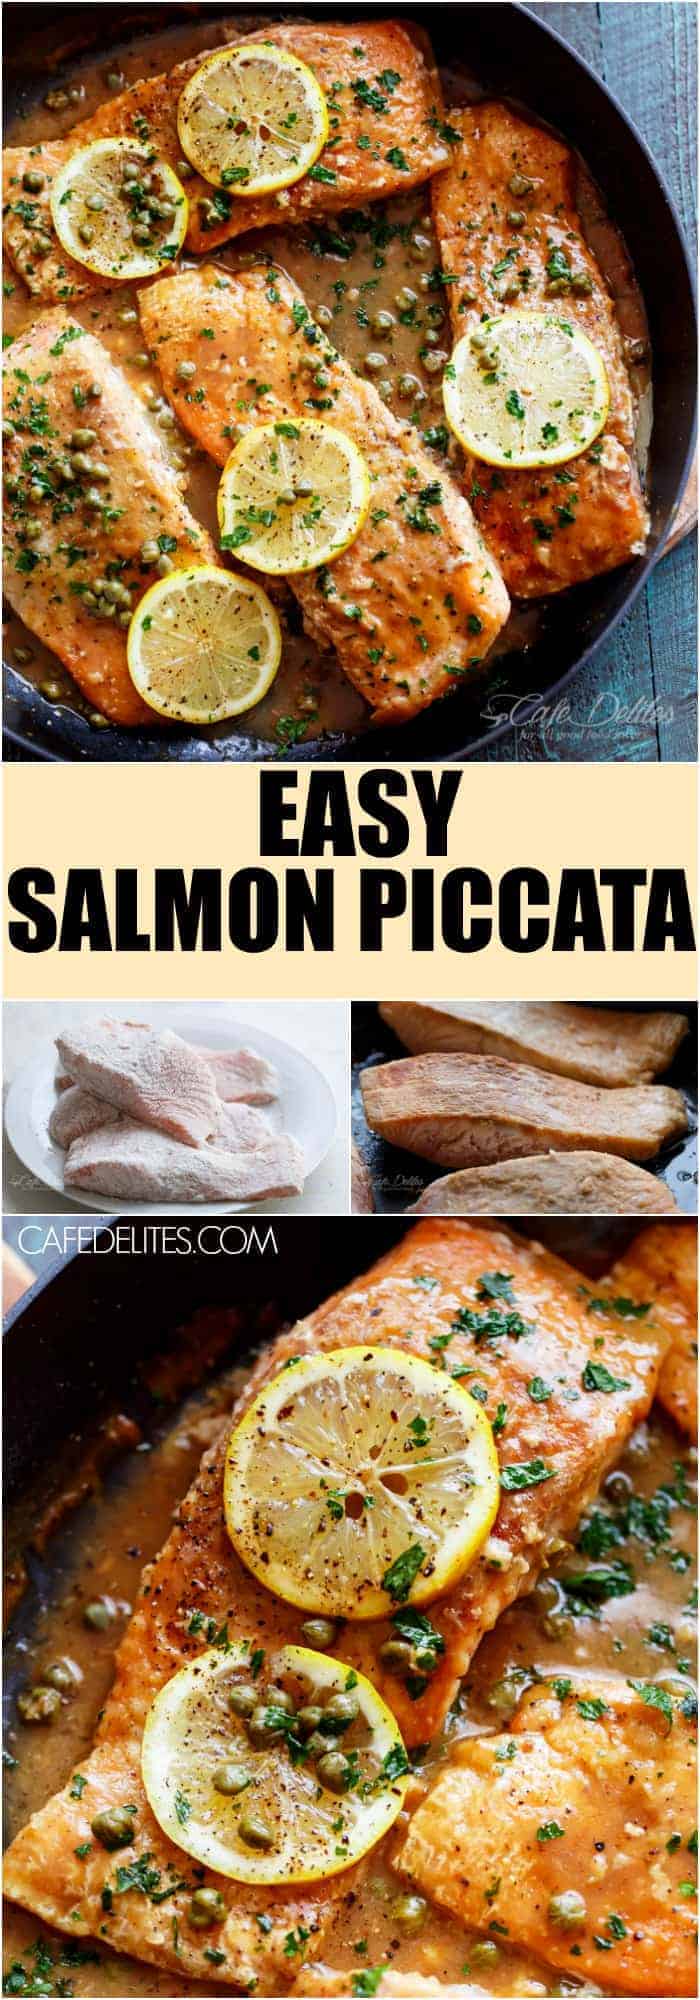 A lightened up, Easy Salmon Piccata with all of the authentic Piccata flavours of white wine, capers, lemon and garlic. Gourmet cooking in minutes! | https://cafedelites.com